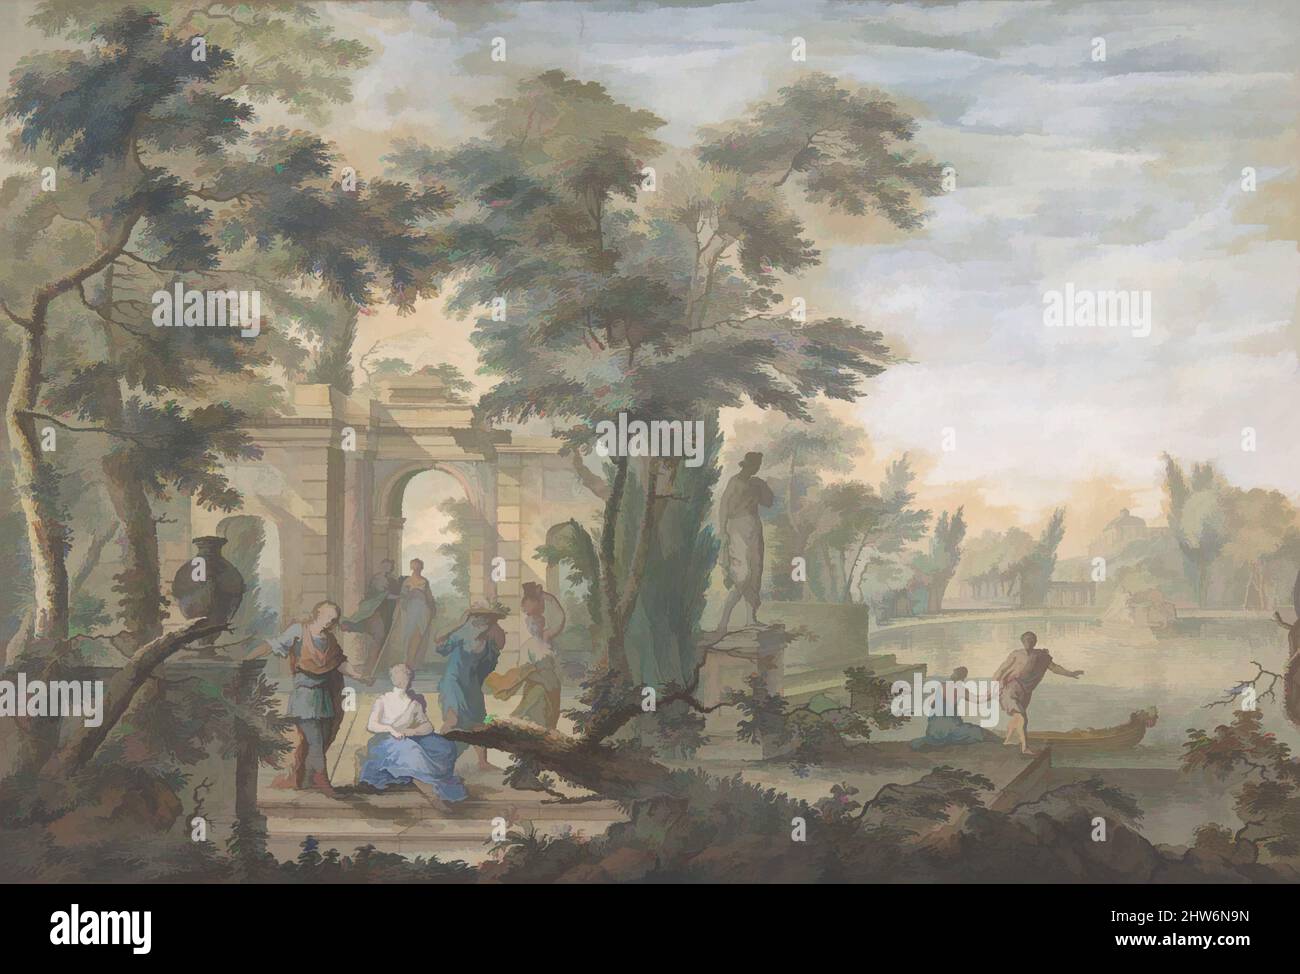 Art inspired by Arcadian Landscape with several Figures and a Statue of Diana, 18th century, Watercolor and gouache, sheet: 8 15/16 x 13 13/16 in. (22.7 x 35.1 cm), Drawings, Gerard Melder (Dutch, Amsterdam 1693–1754 Utrecht, Classic works modernized by Artotop with a splash of modernity. Shapes, color and value, eye-catching visual impact on art. Emotions through freedom of artworks in a contemporary way. A timeless message pursuing a wildly creative new direction. Artists turning to the digital medium and creating the Artotop NFT Stock Photo